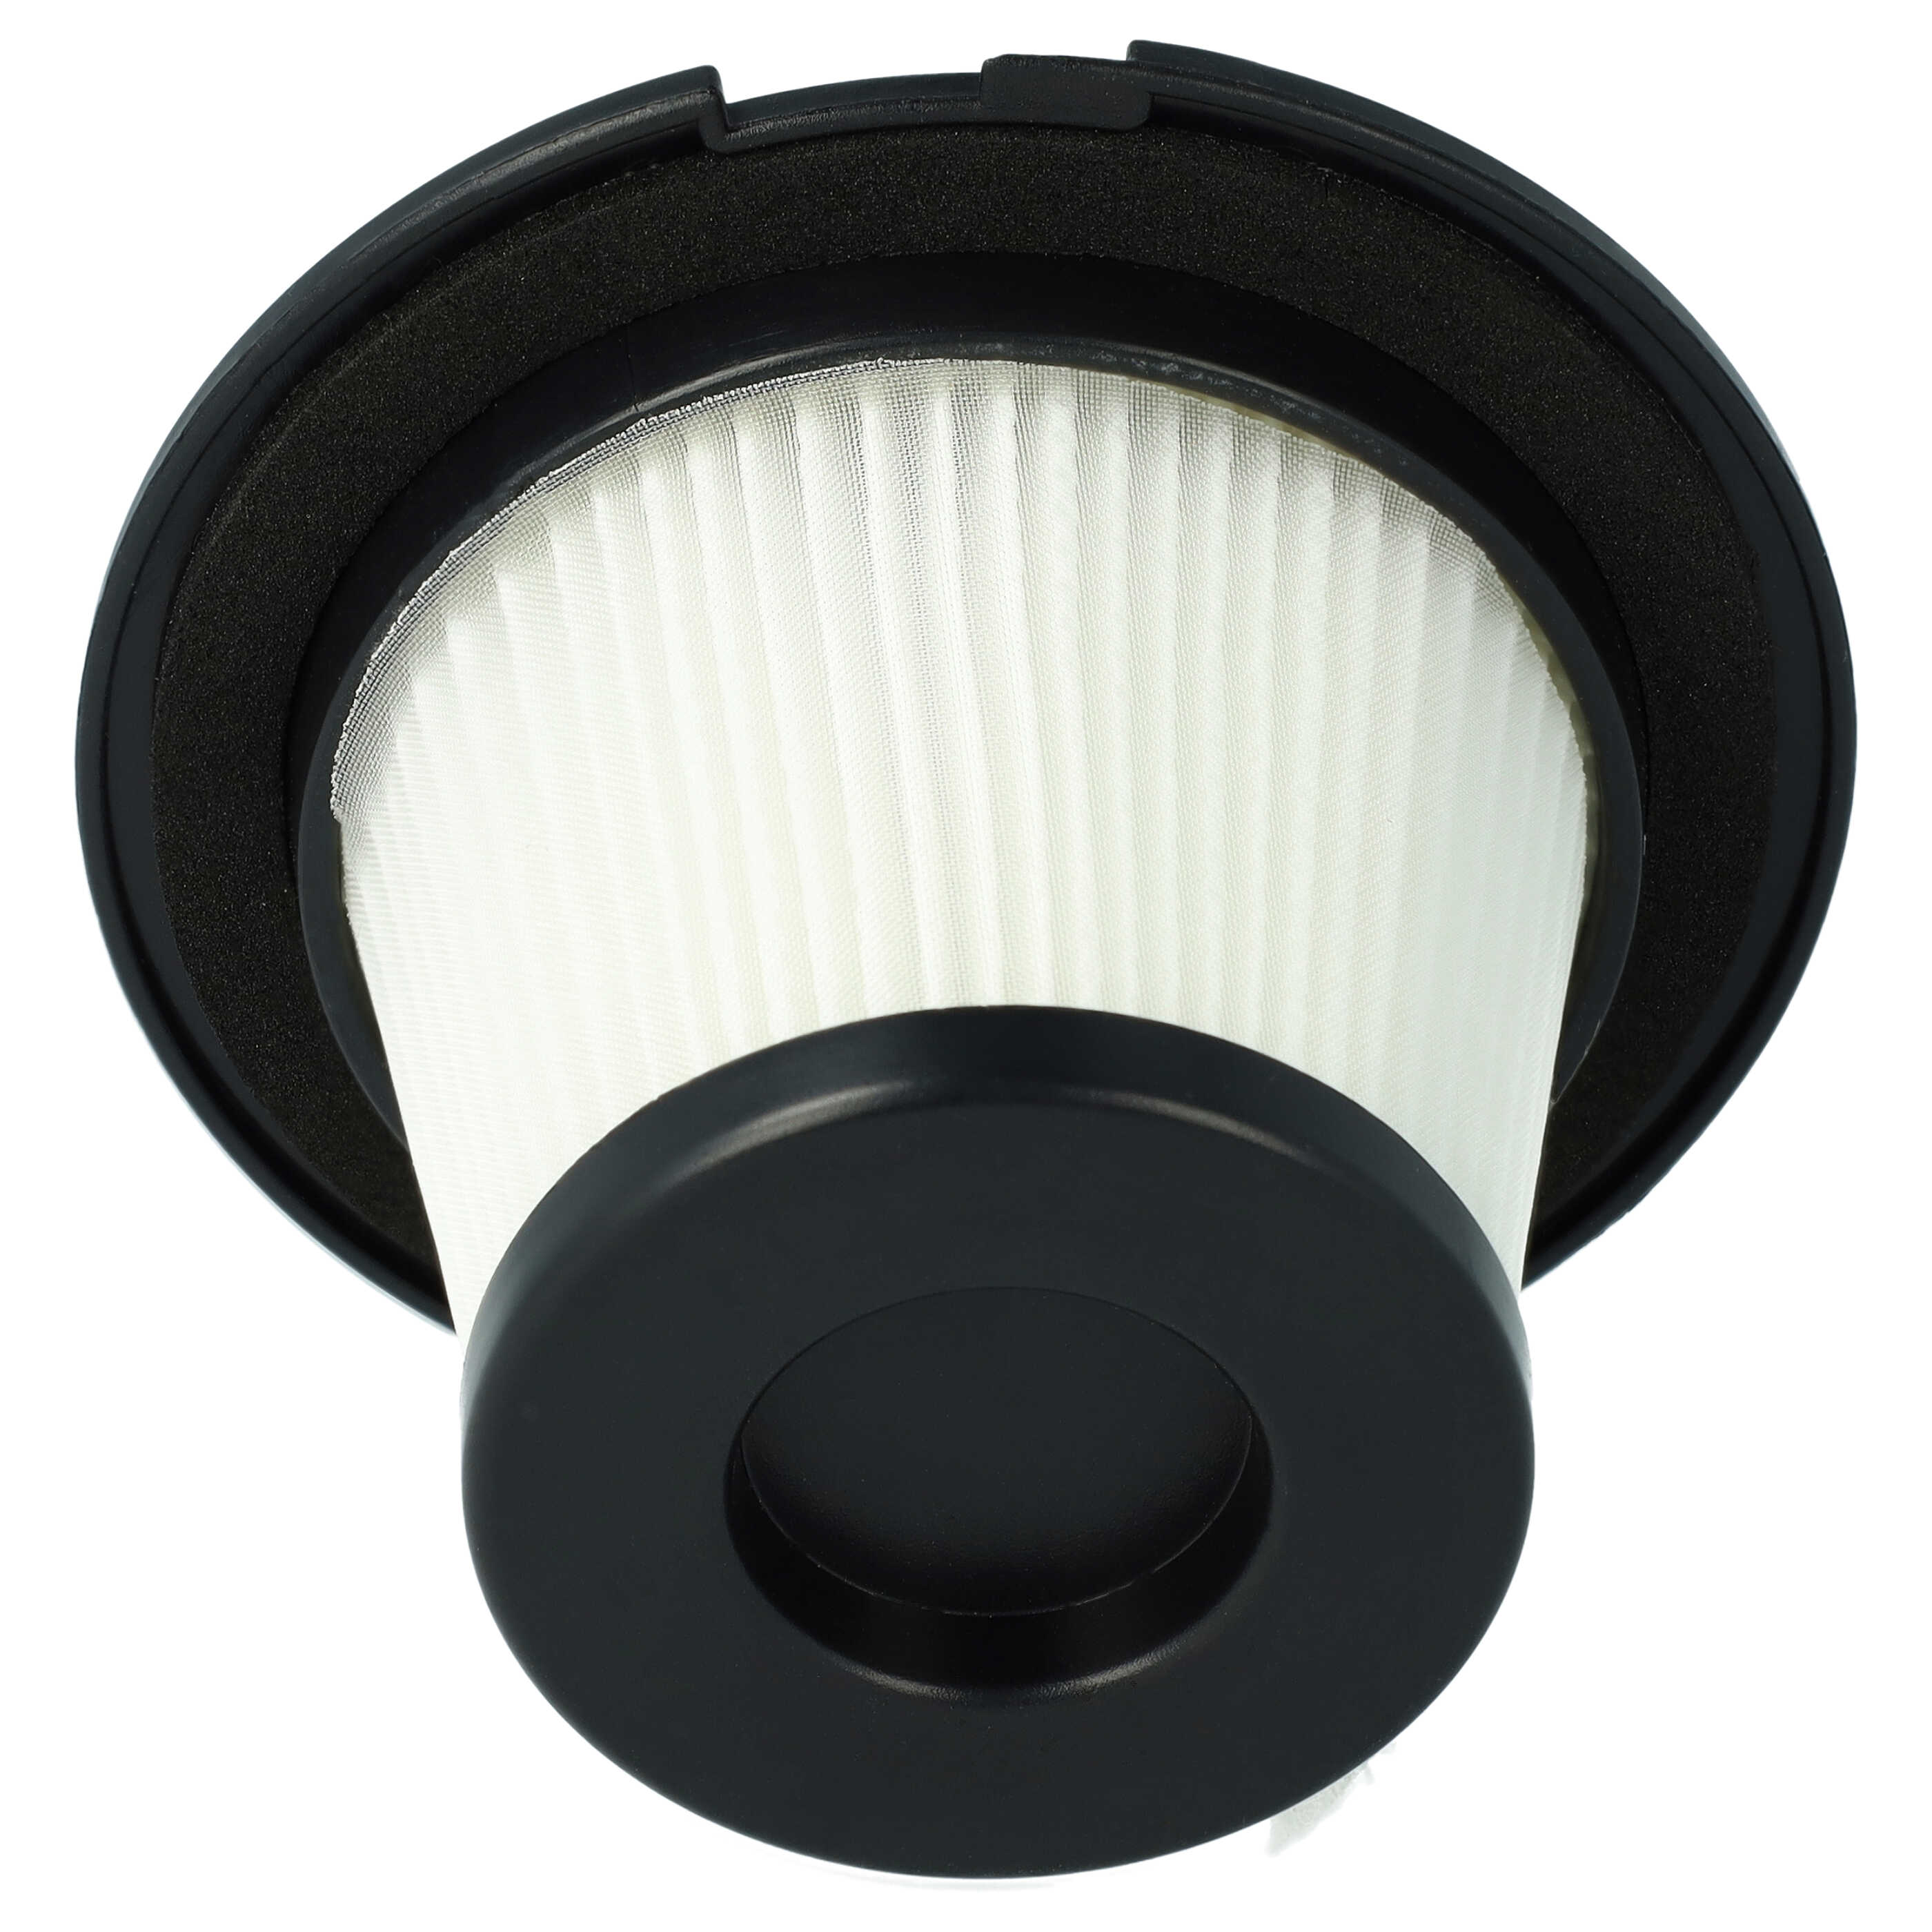 1x filter suitable for Clean Butler 4G Silent 10033762, Clean Butler 4G Silent 10033763, K17, UVC-122311.3 Kla